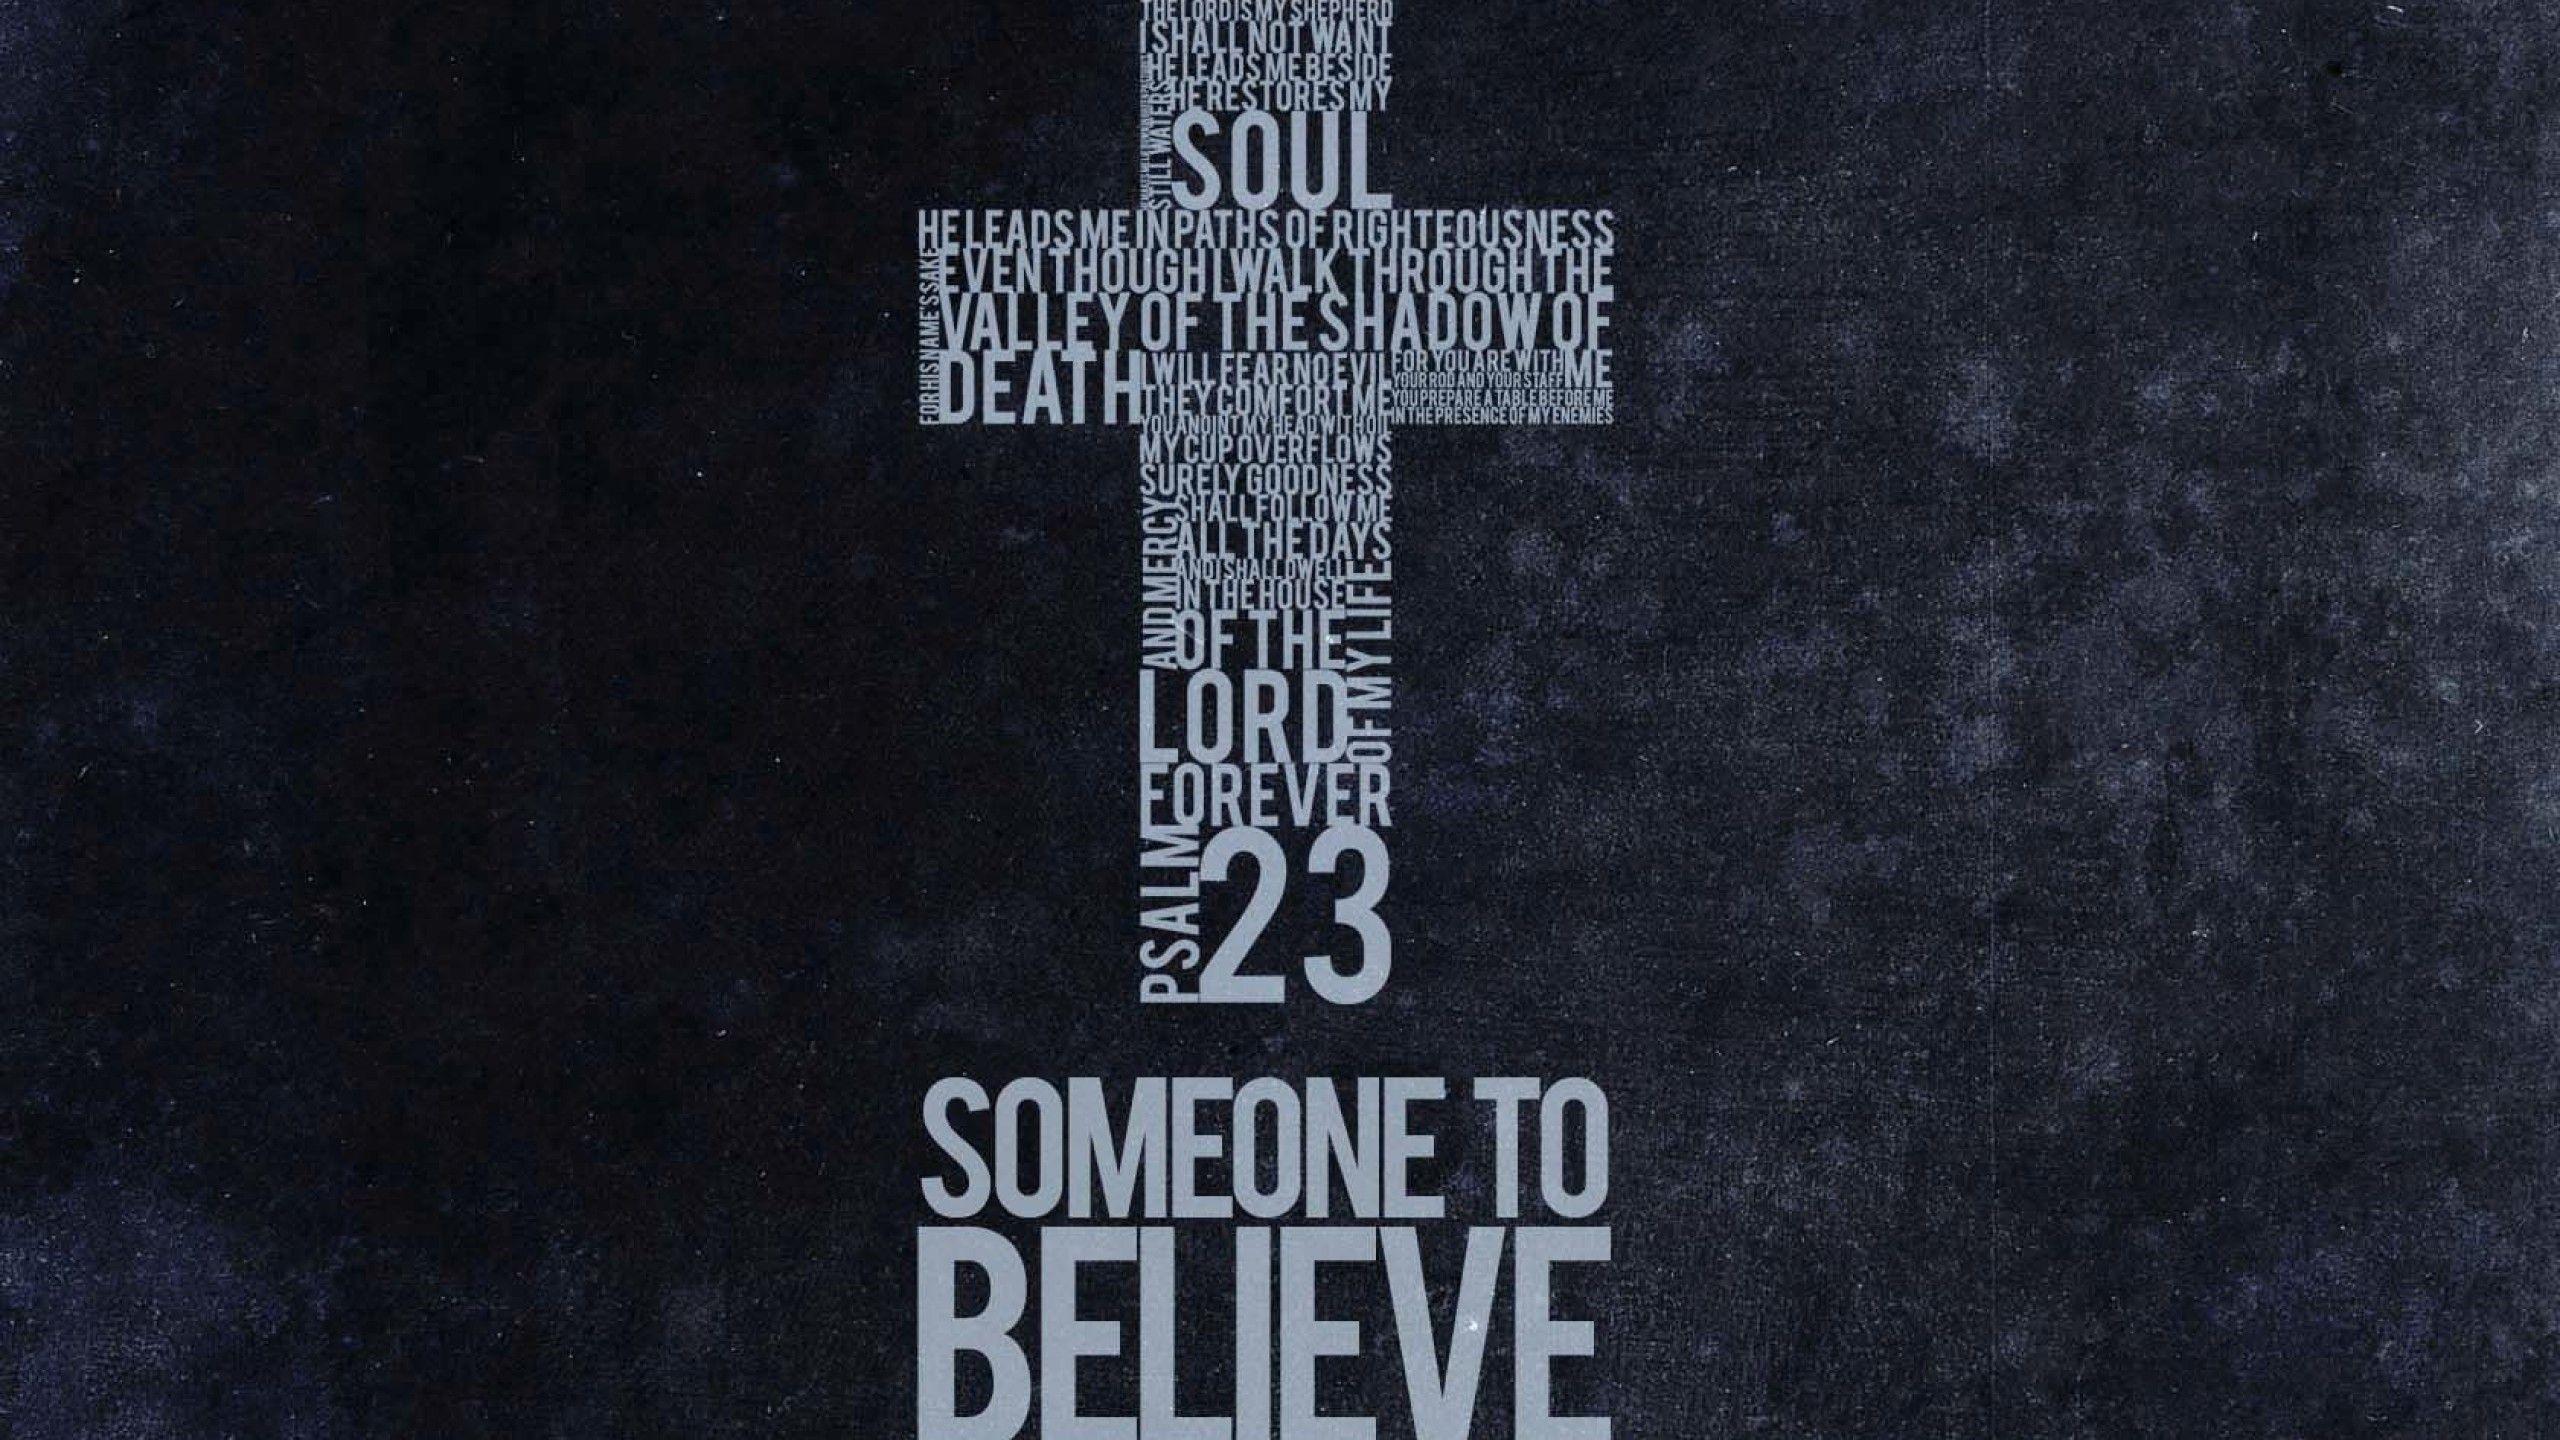 Christian Iphone wallpapers